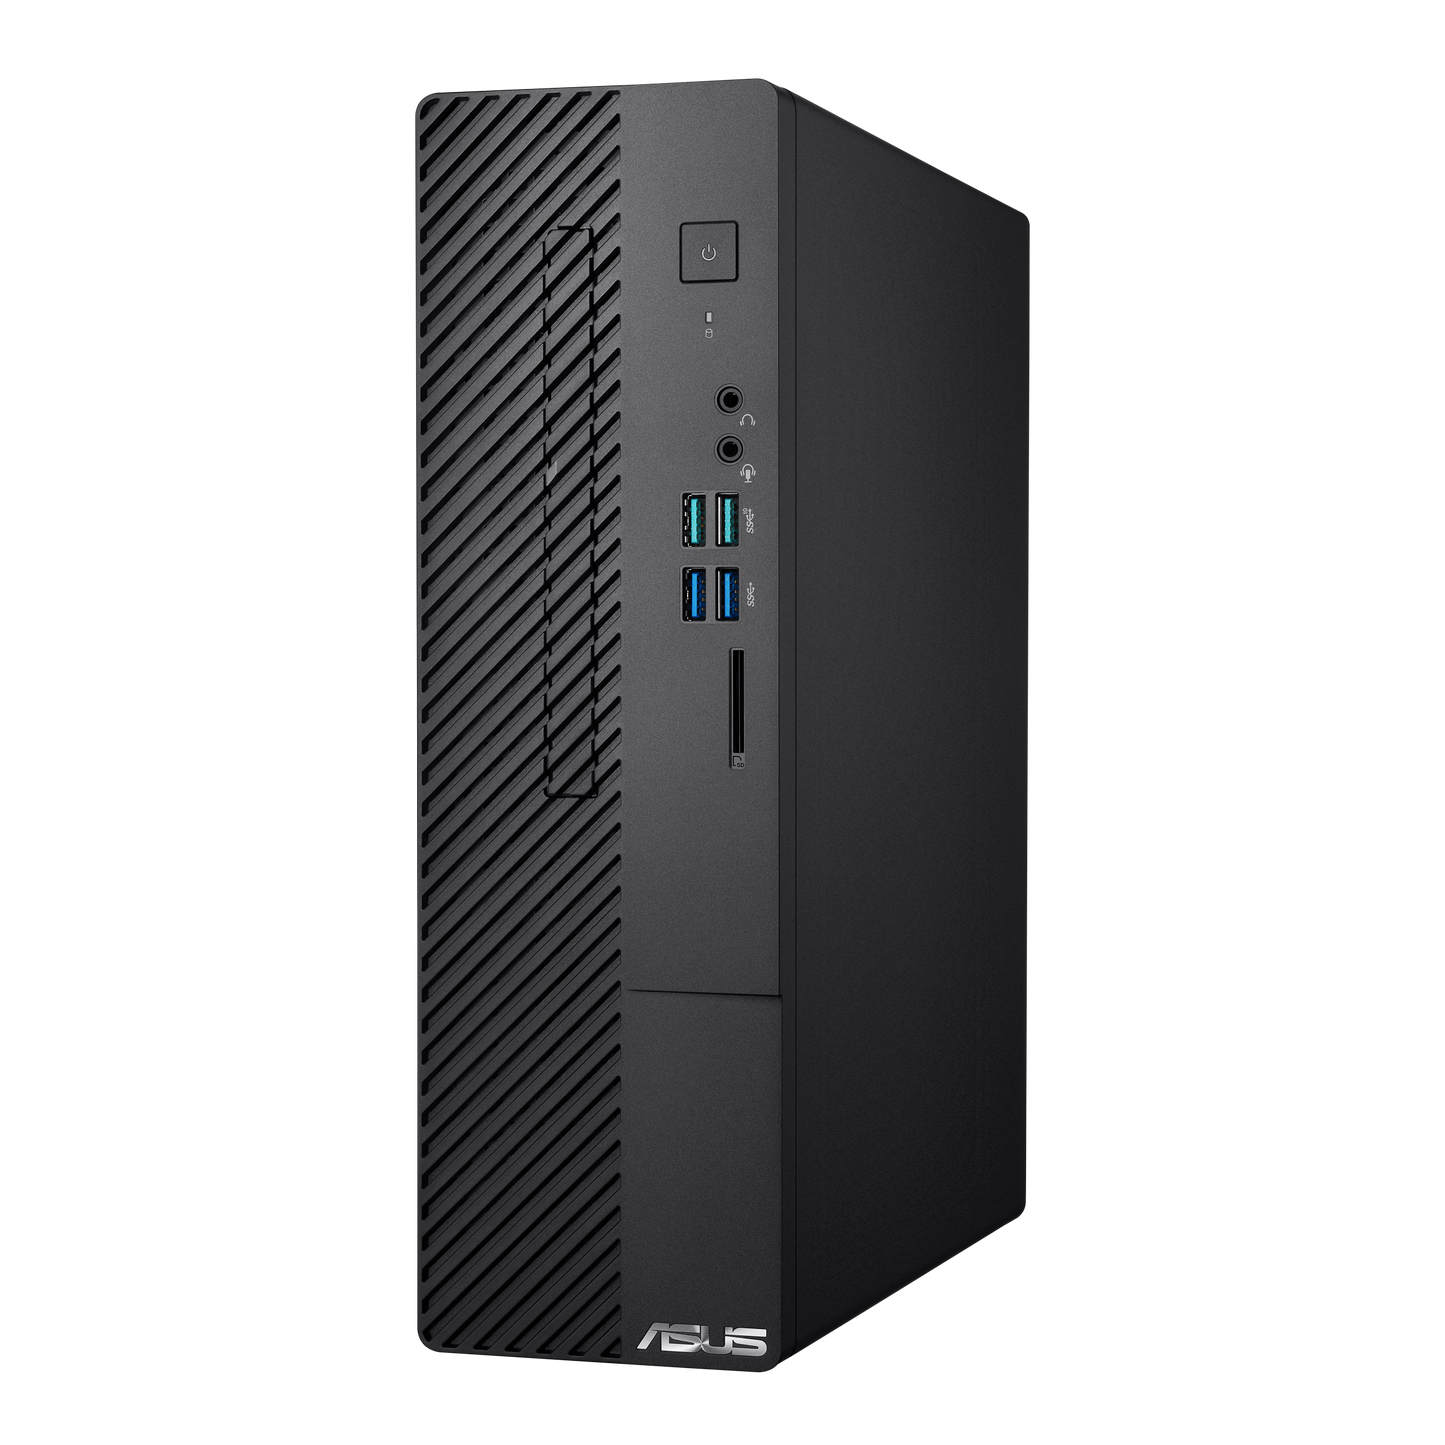 ASUS S500SC Tower Desktop Core I3-10105 With Free LG 22" 22MP410 Monitor Offer